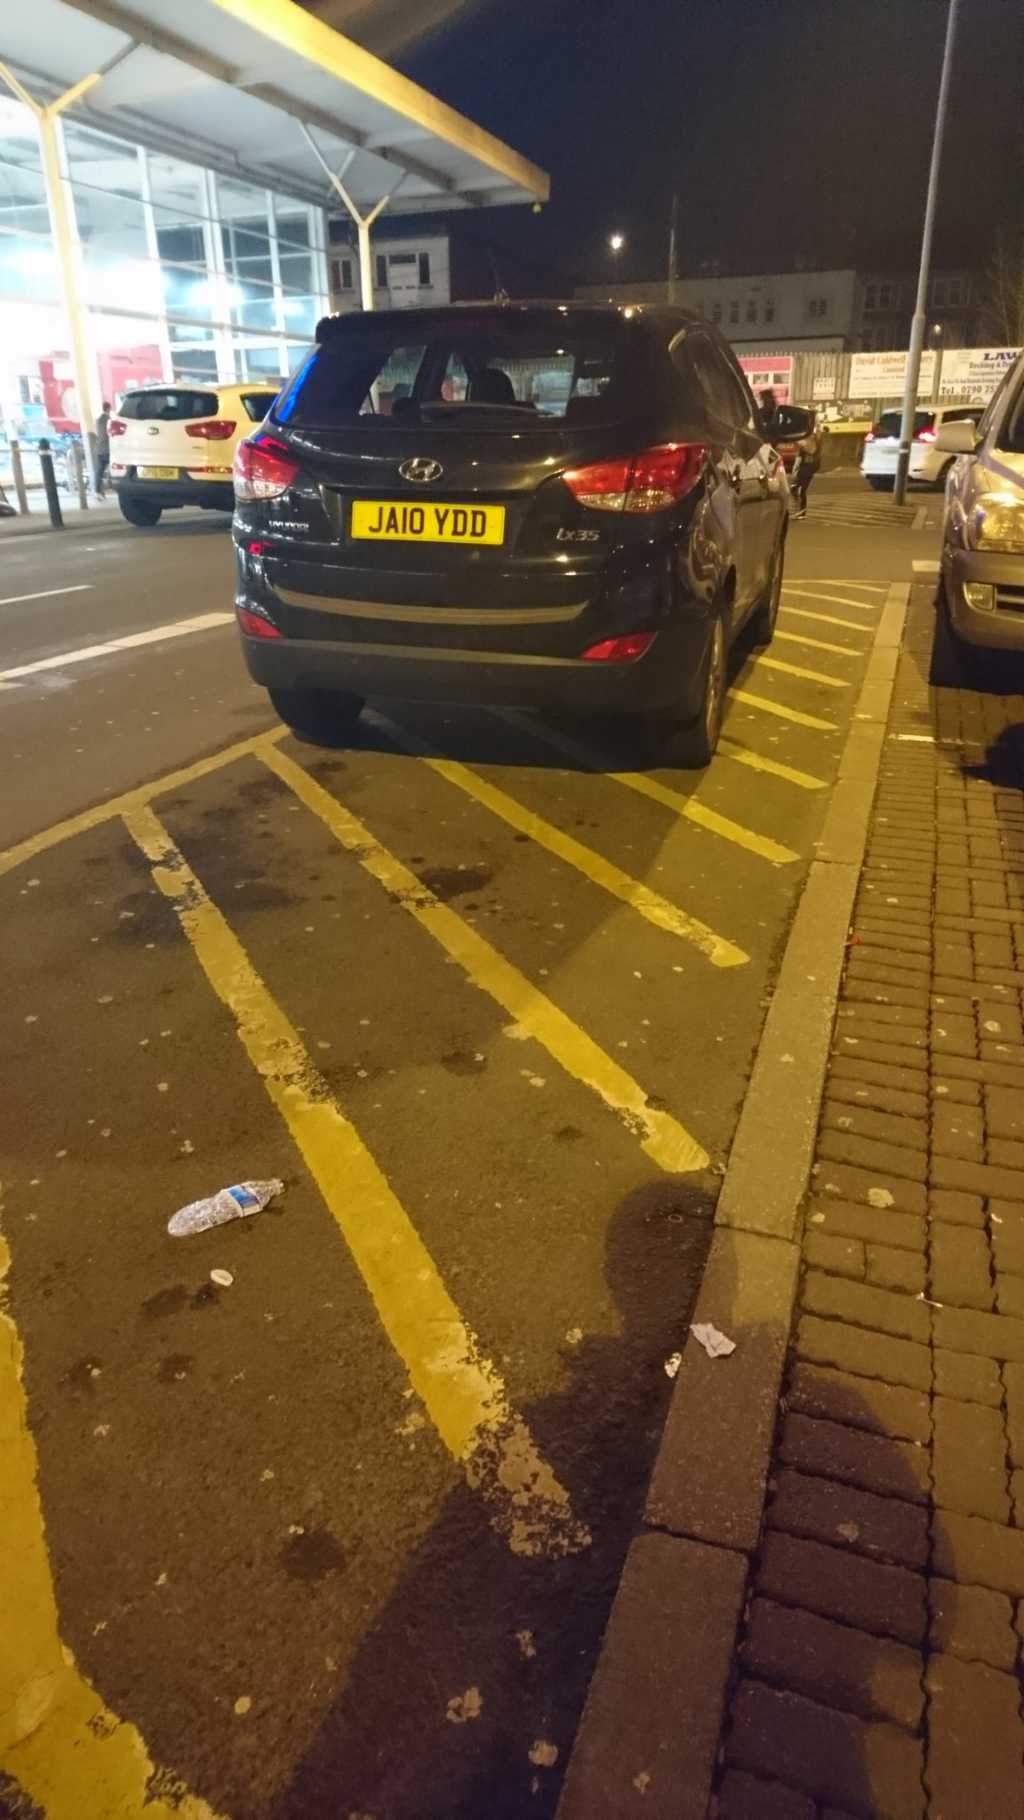 JA10 YDD is an Inconsiderate Parker